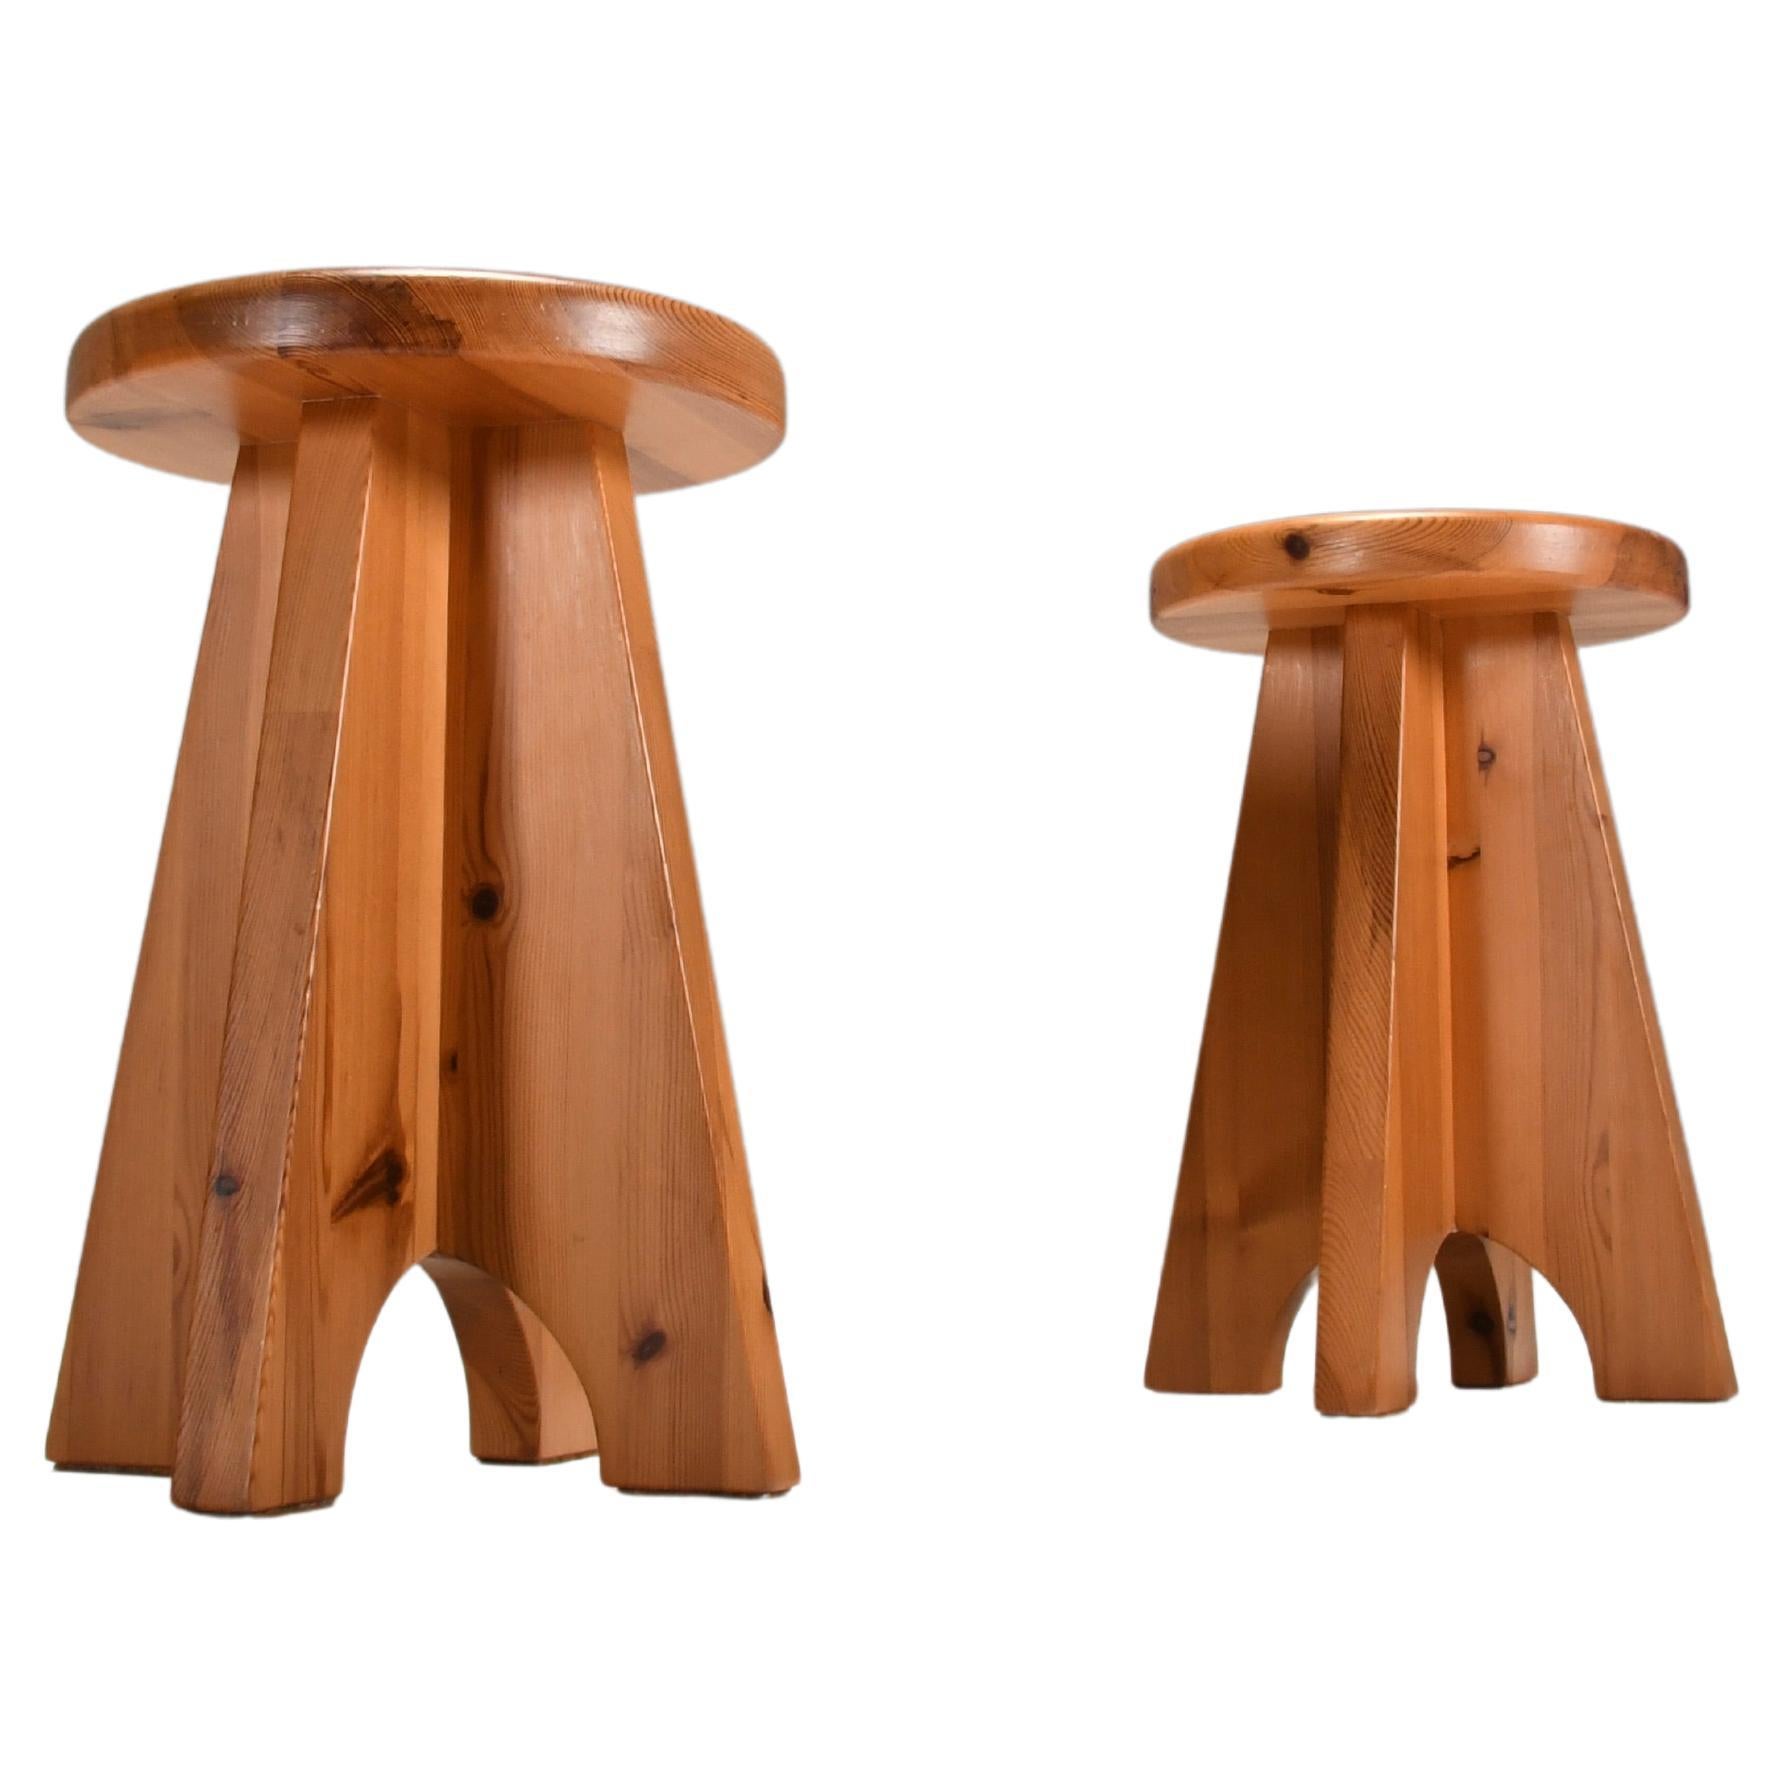 Solid Midcentury Pine Stools, Sweden, 1960s For Sale